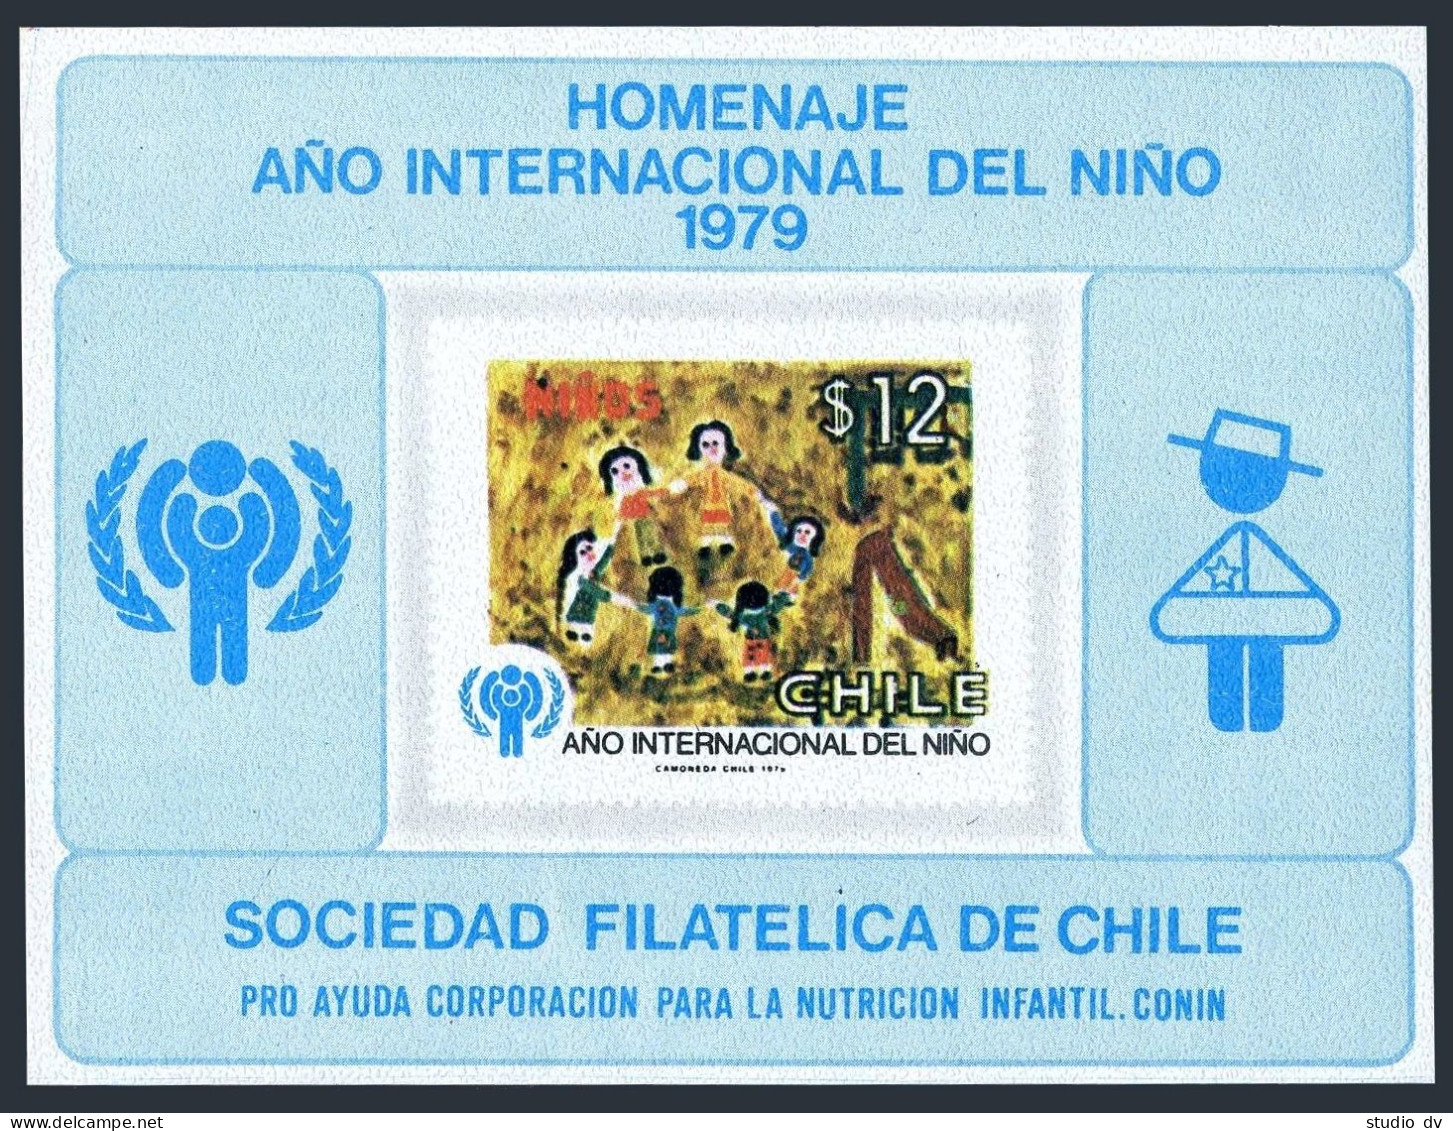 Chile 553-555,555a, MNH. Michel 913-915, Note. IYC-1979. Children's Drawings. - Chili